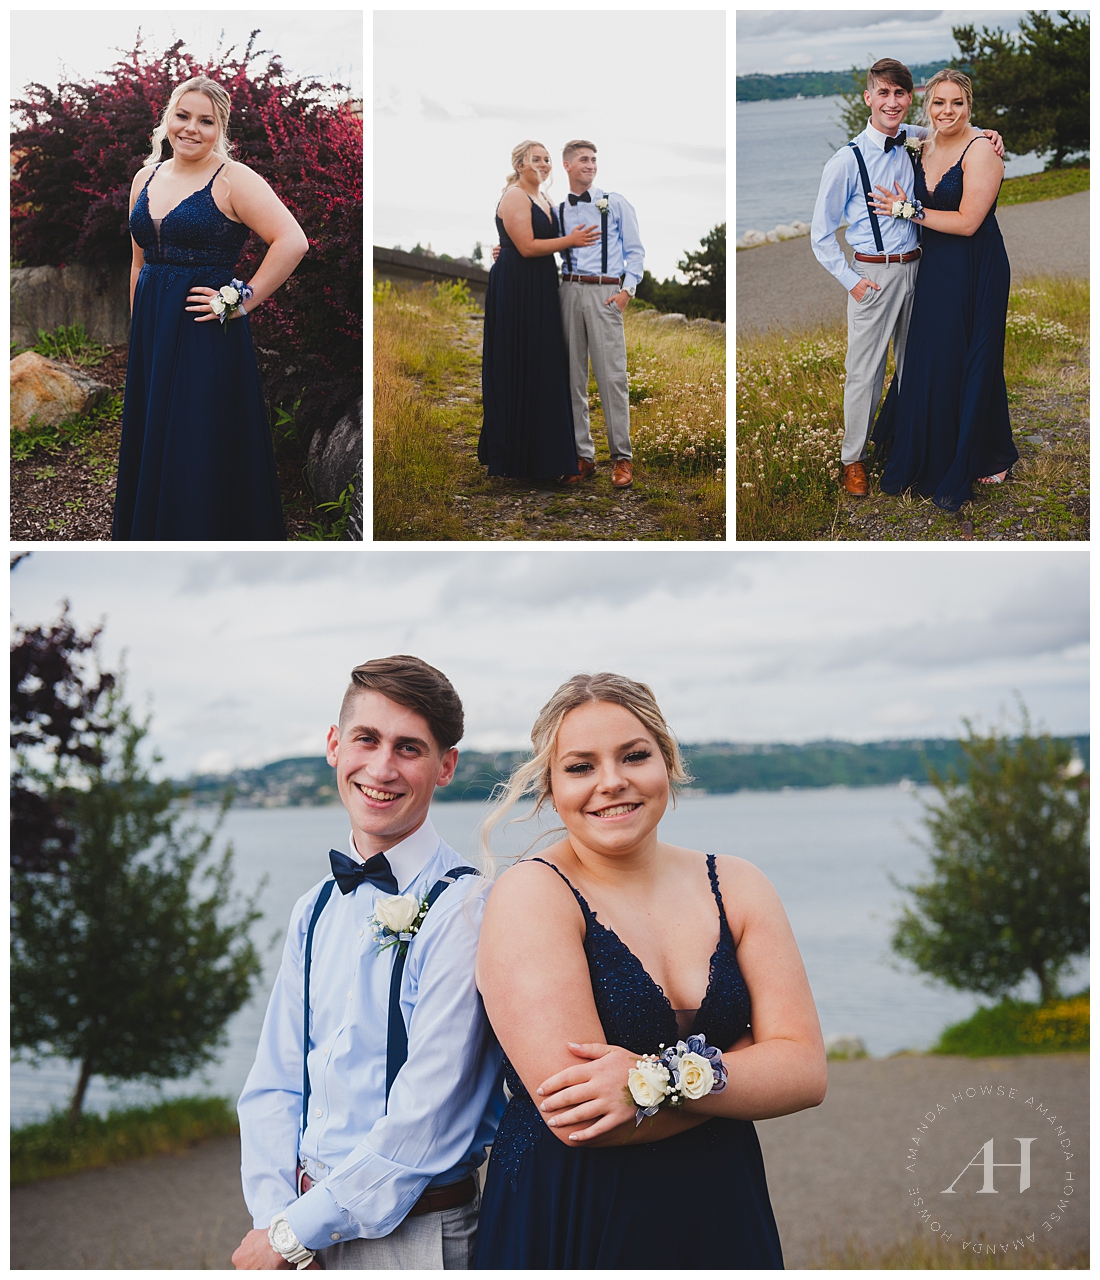 Cute Prom Date Portraits in Tacoma | Tacoma Waterfront Portraits for Prom | Photographed by Amanda Howse Photography